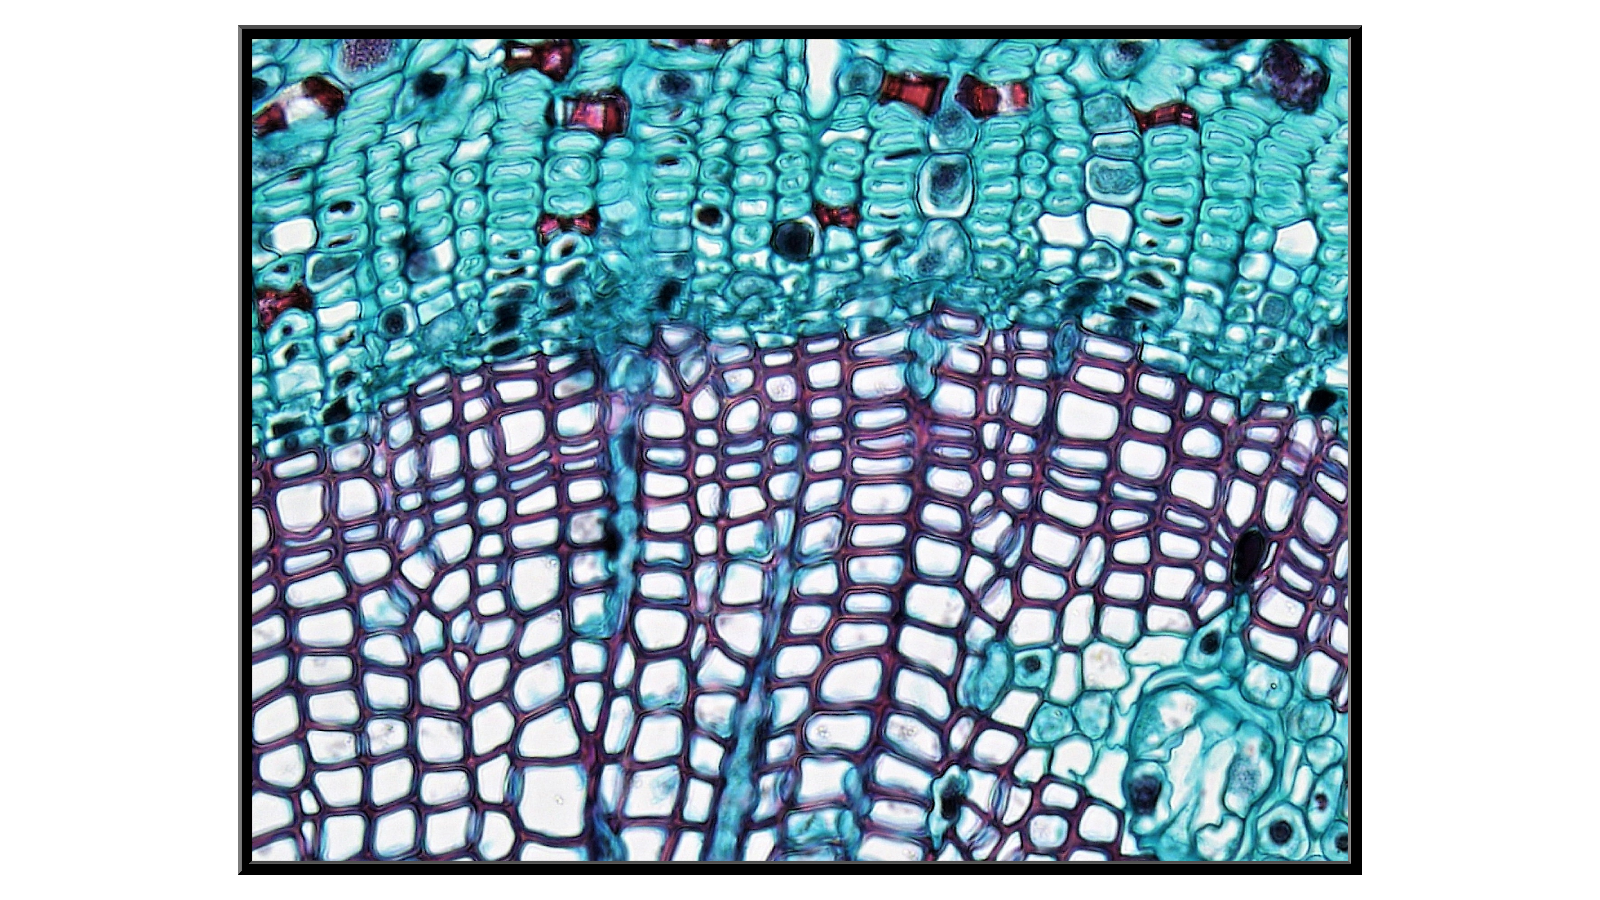 Cross-section of a one-year-old pine stem x400